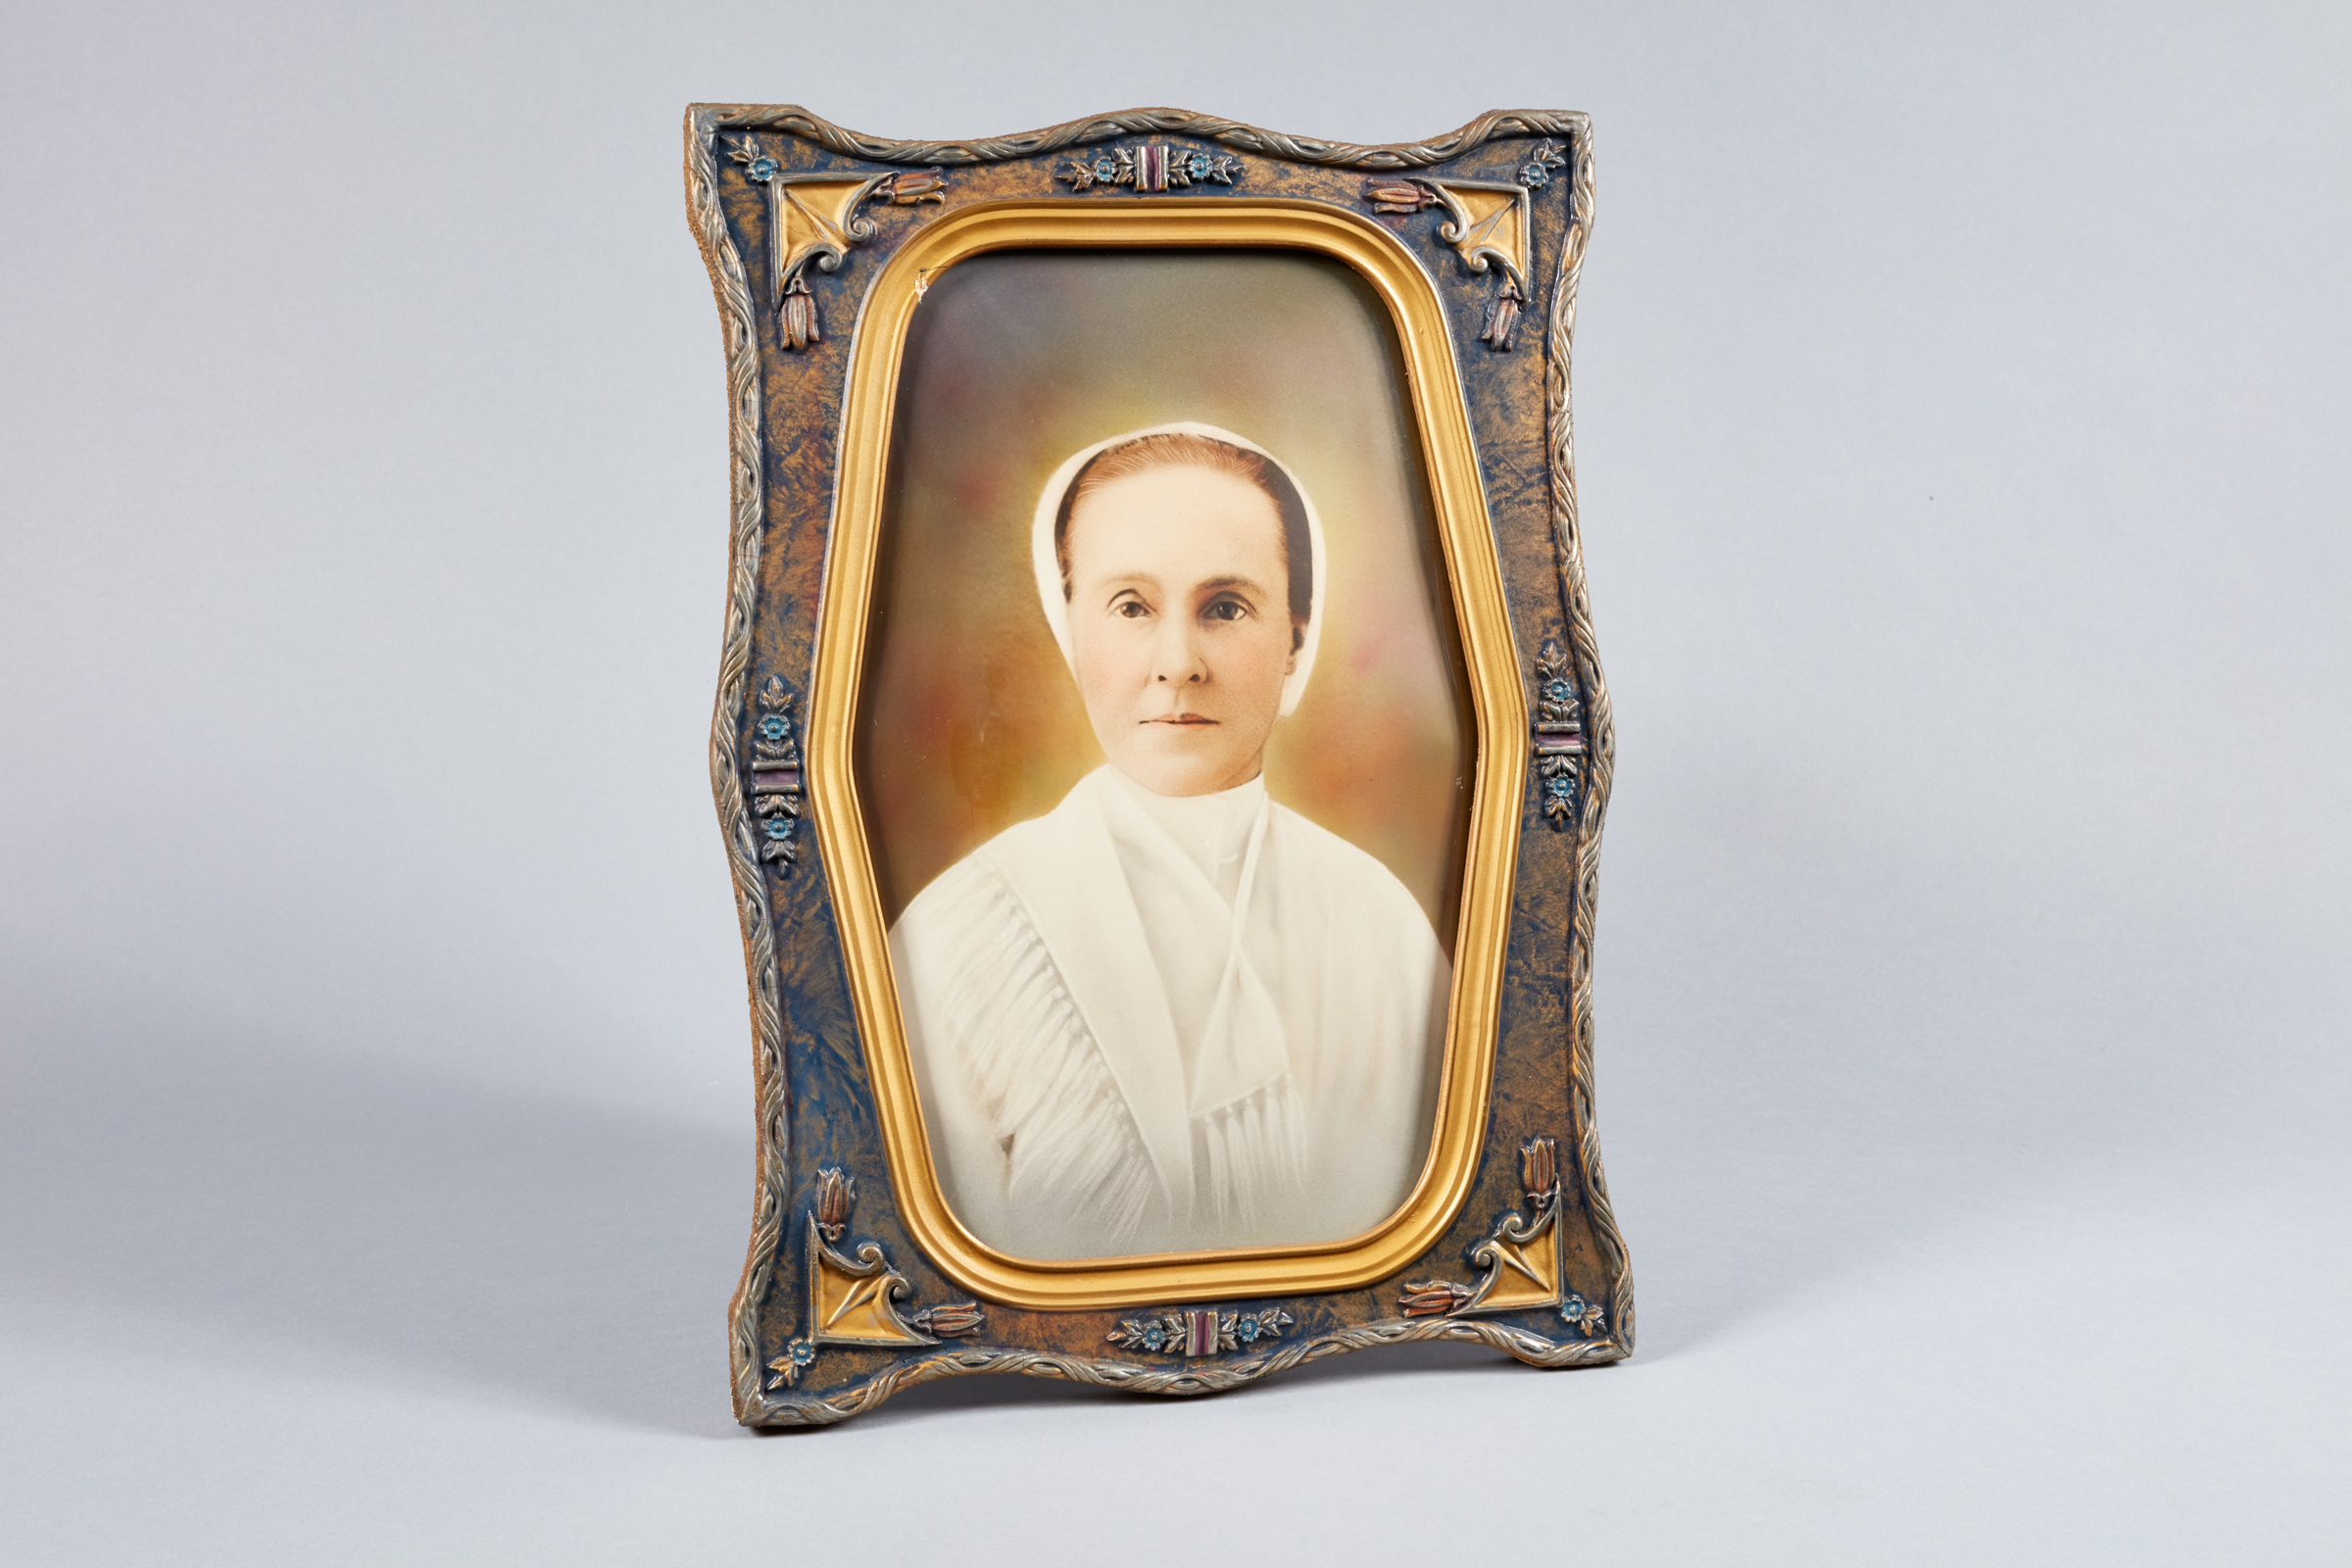 A portrait of a woman in an ornate frame.